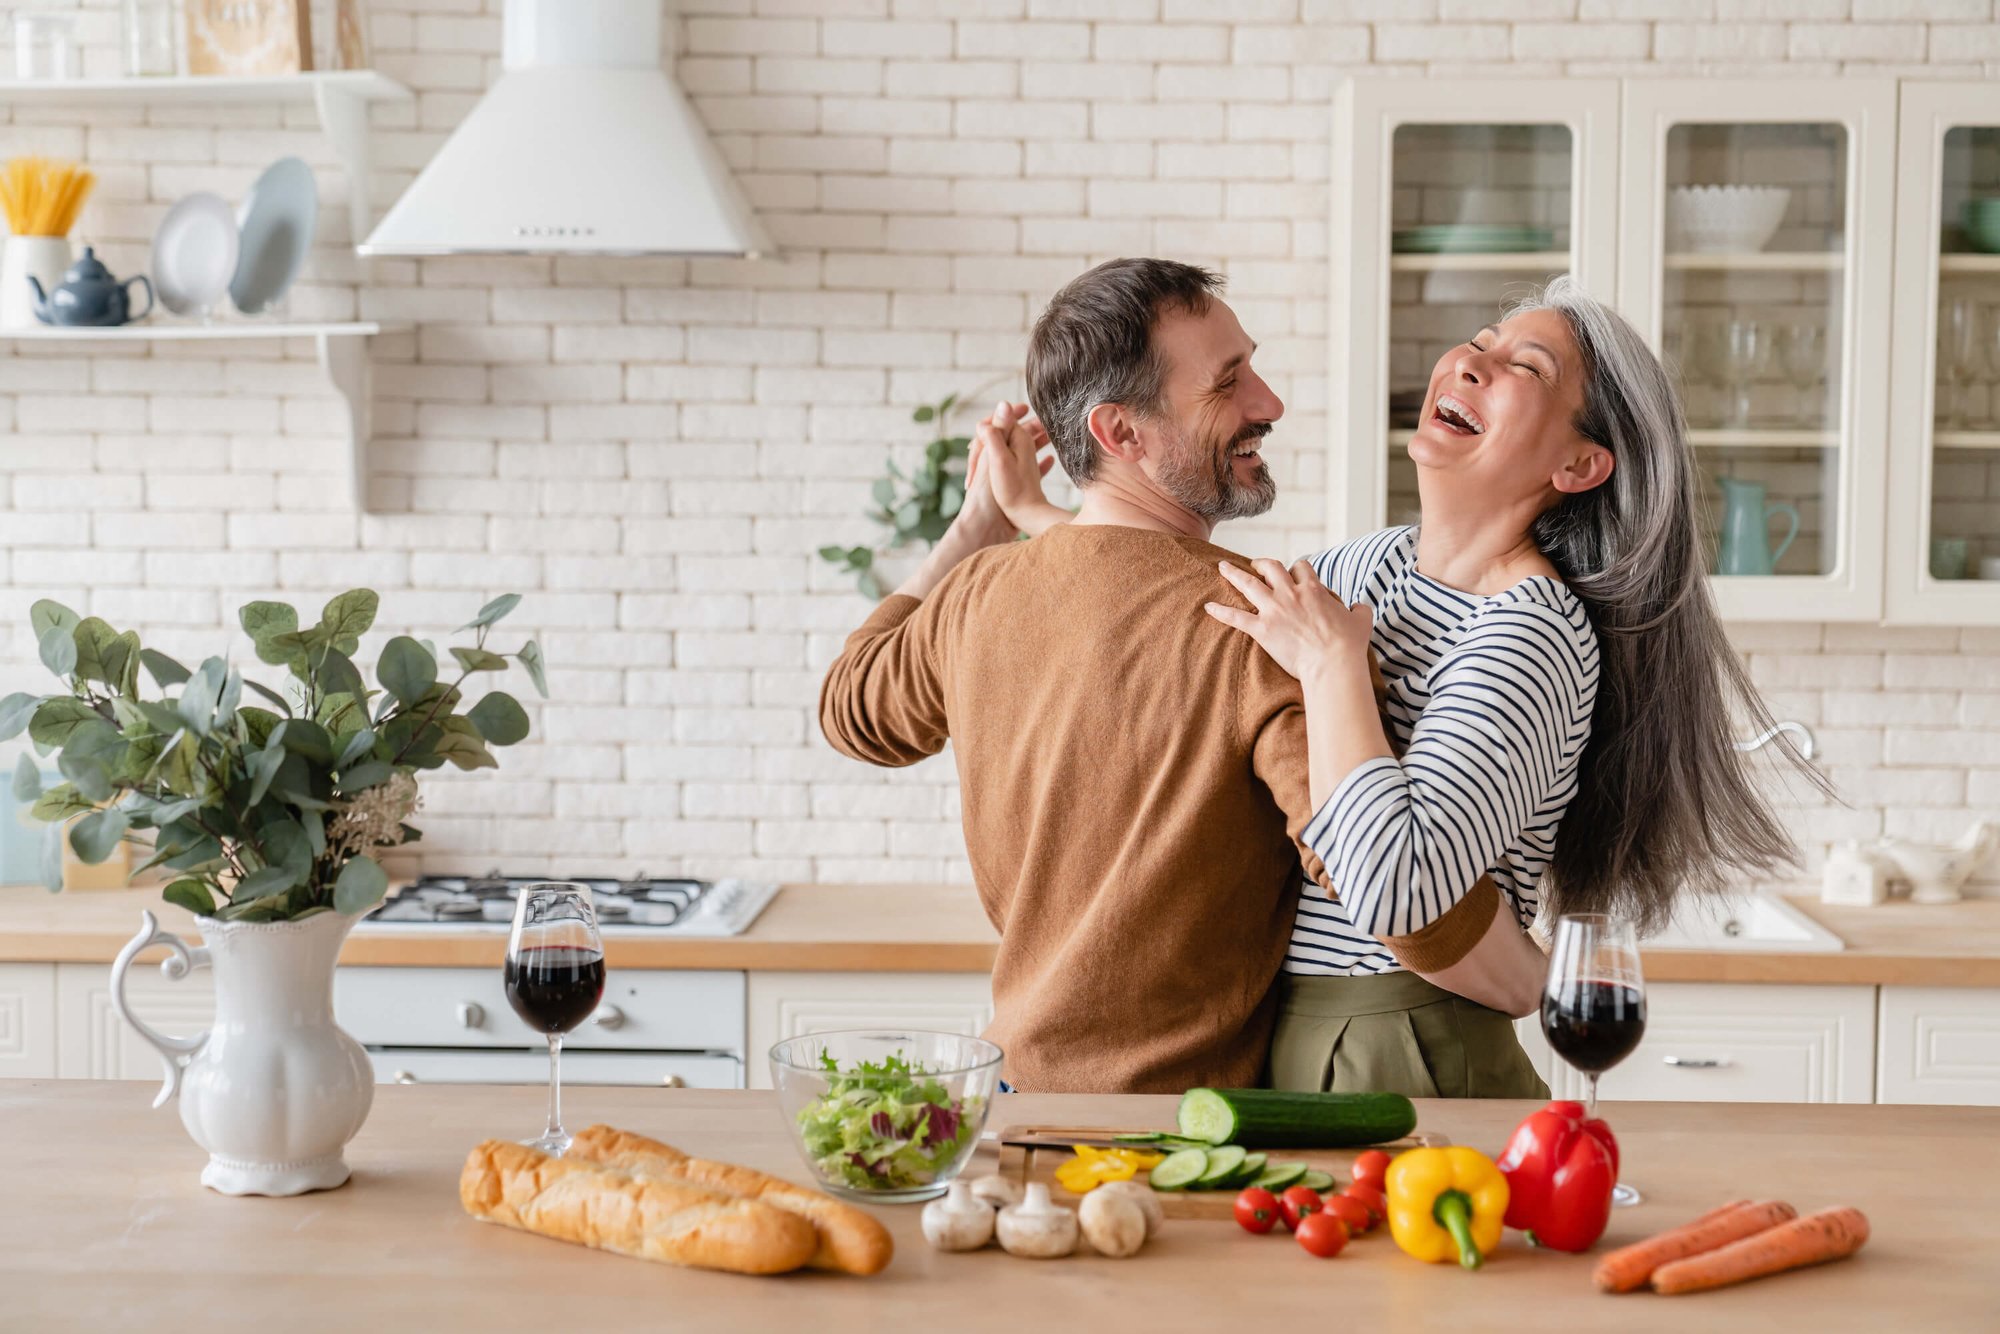 TN-Mental-Wellness-Couples-Therapy-old-man-old-lady-dancing-in-kitchen-smiling